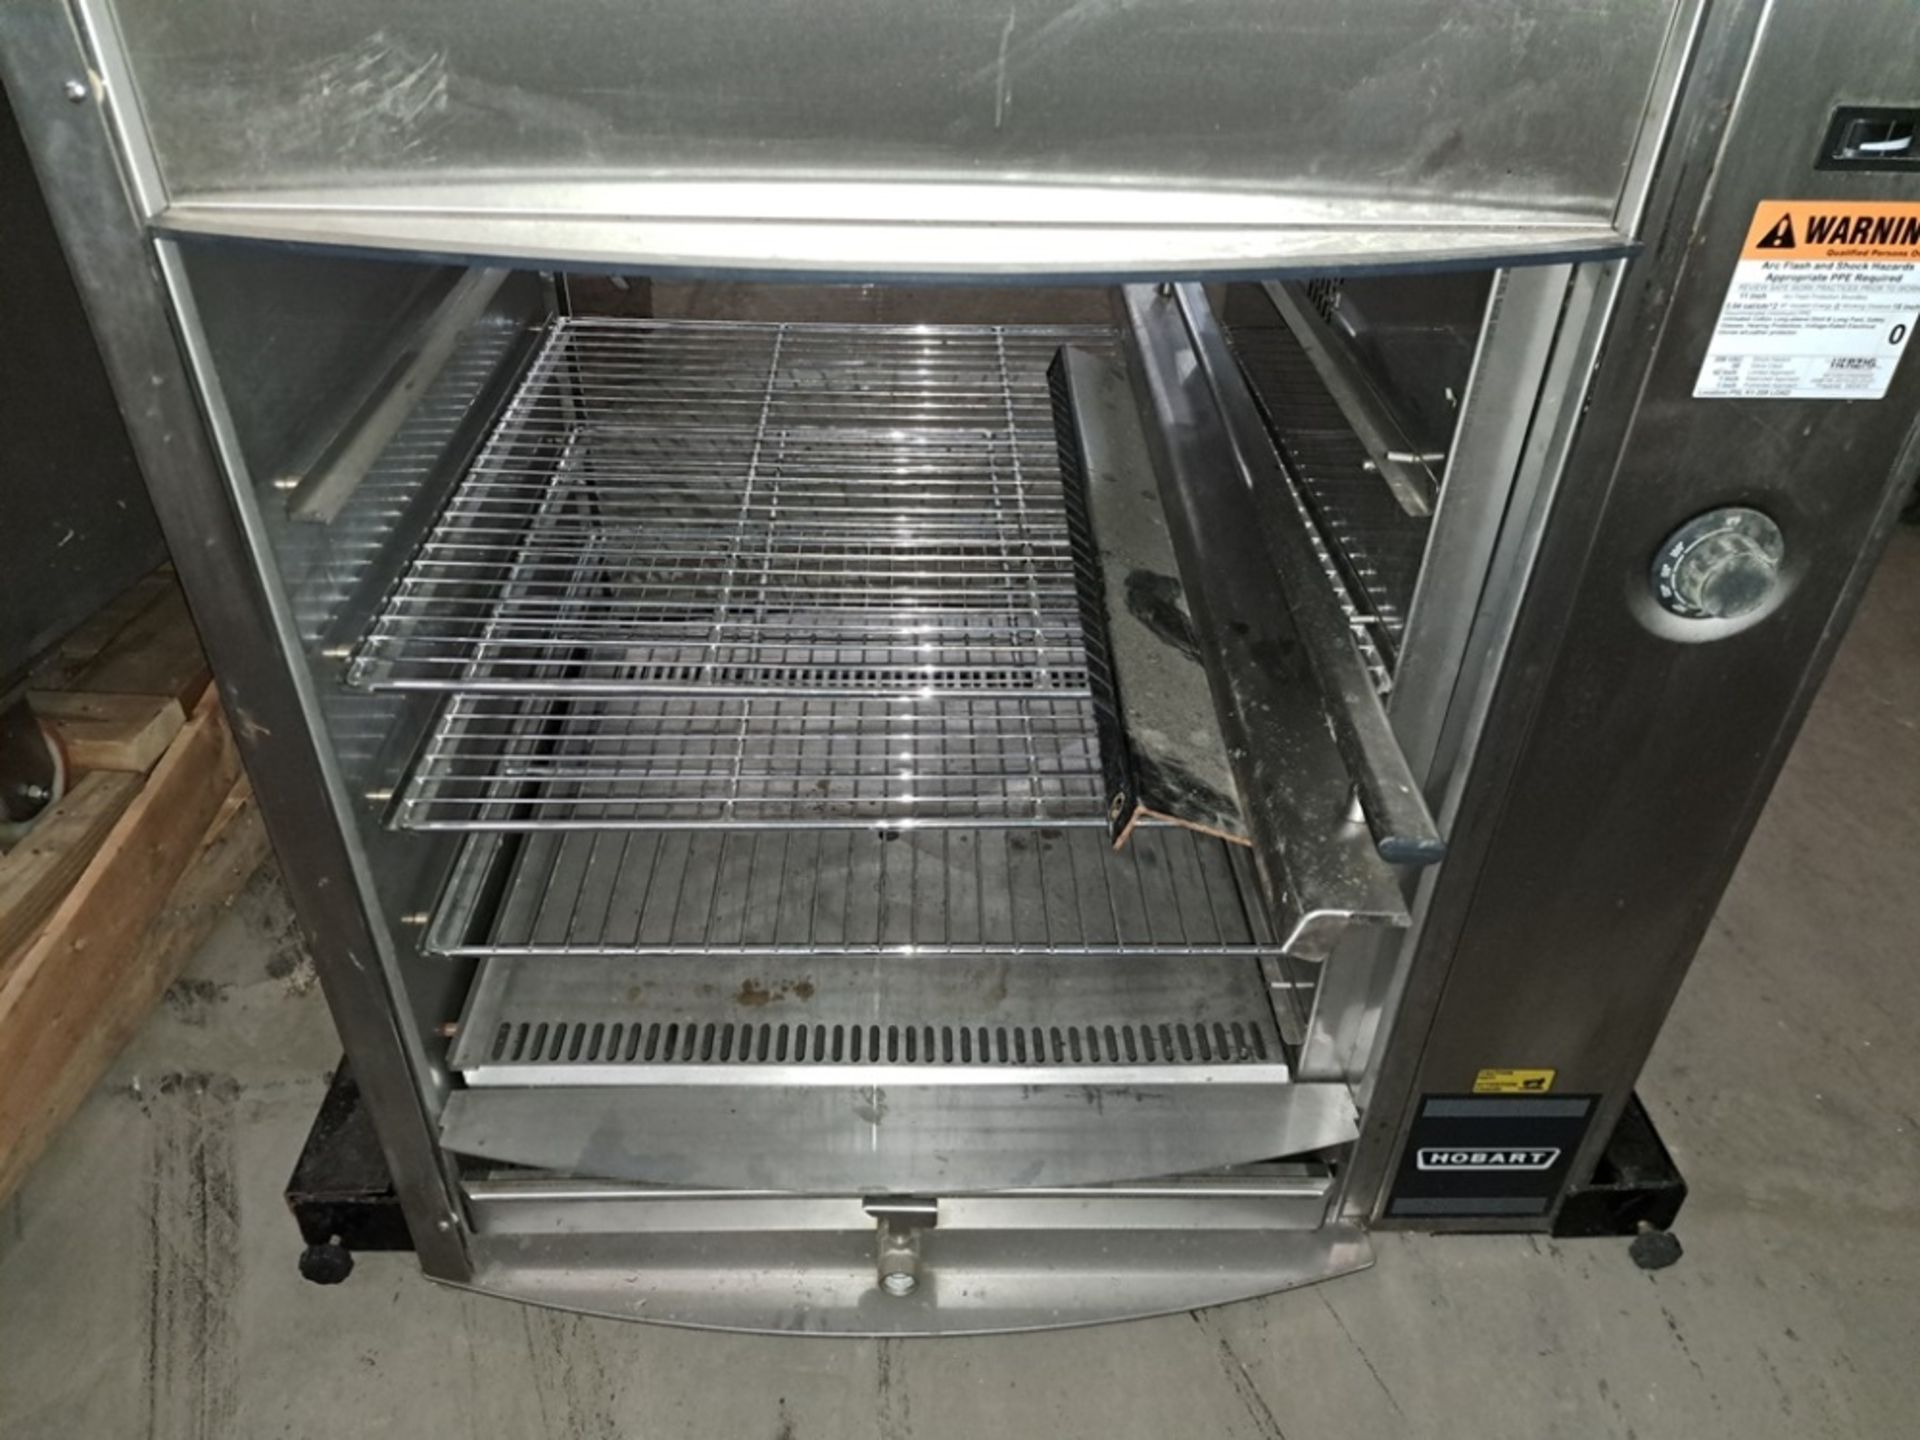 Hobart Mdl. HR7 Rotisserie Oven, Ser. #750012656, 208 volts, 1/3 phase, with storage (missing glass) - Image 4 of 6